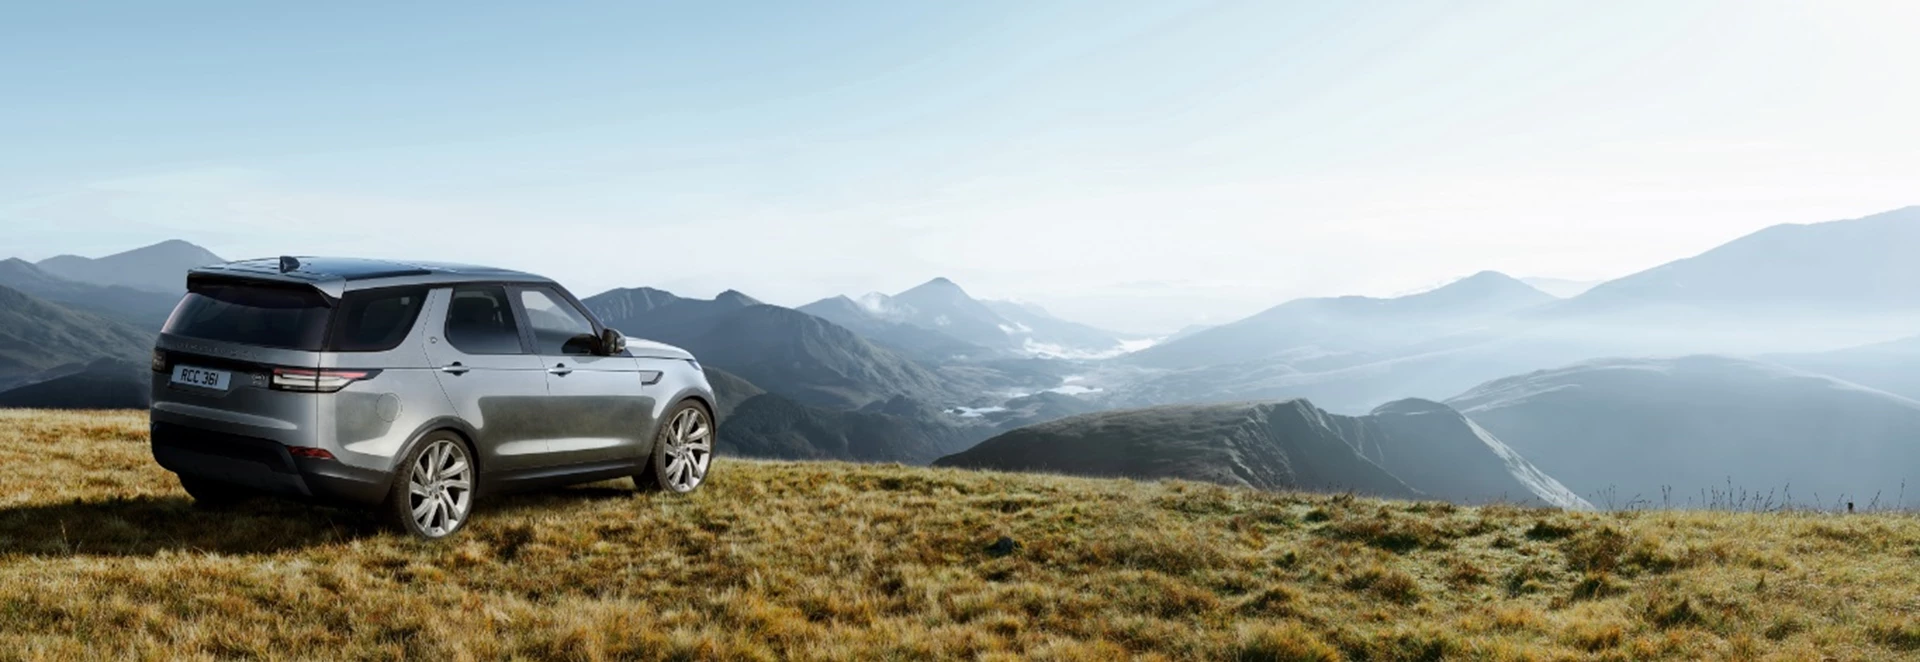 Land Rover celebrates Discovery anniversary with special edition